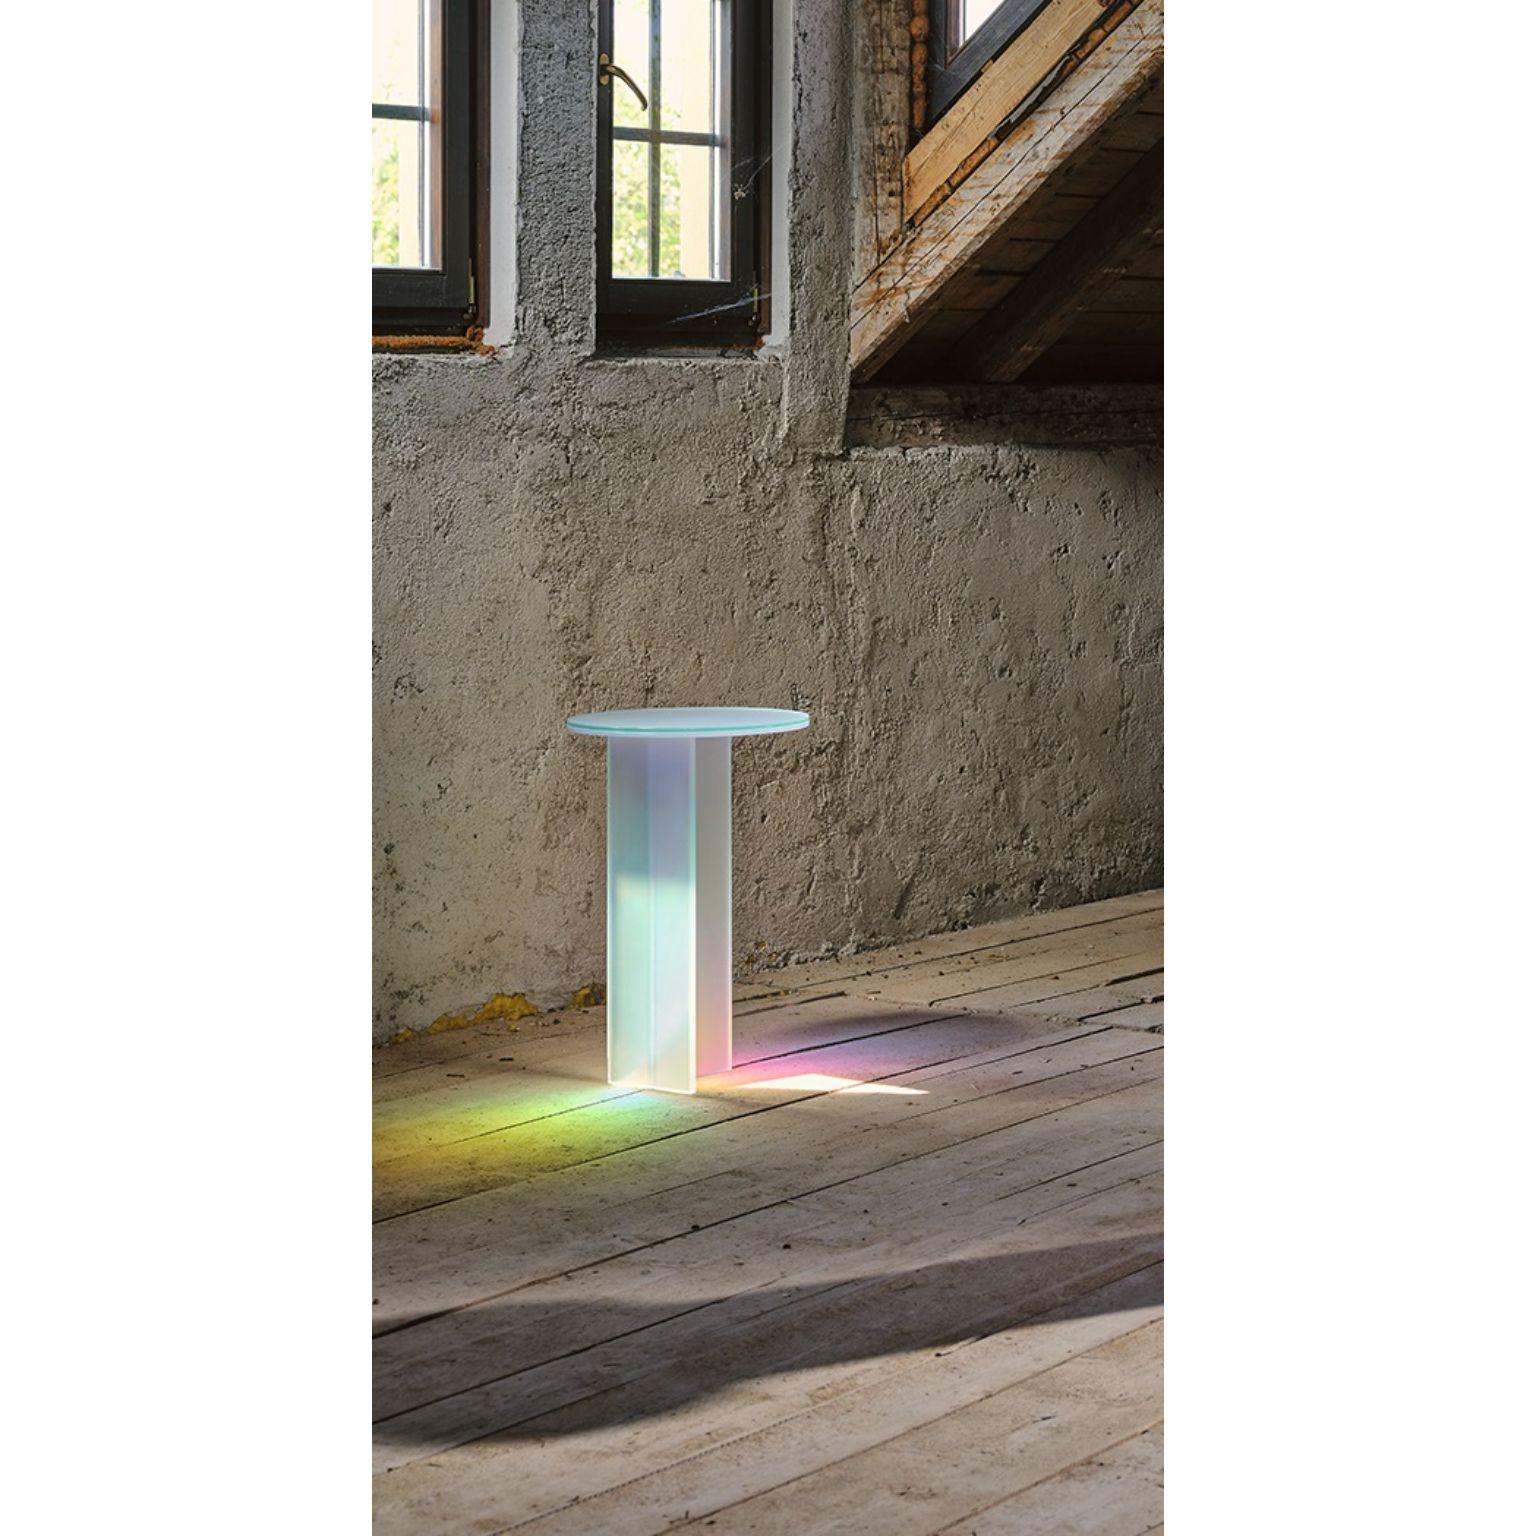 Isola Dichroic Satin Glass T Side Table by Brajak Vitberg
Materials: Satin glass and dichroic film.
Dimensions: Ø 40 x H 65 cm.

Dichroic Satin Glass Edition. Available in different shapes (L, H and T). Please contact us. 

Brajak Vitberg is an art